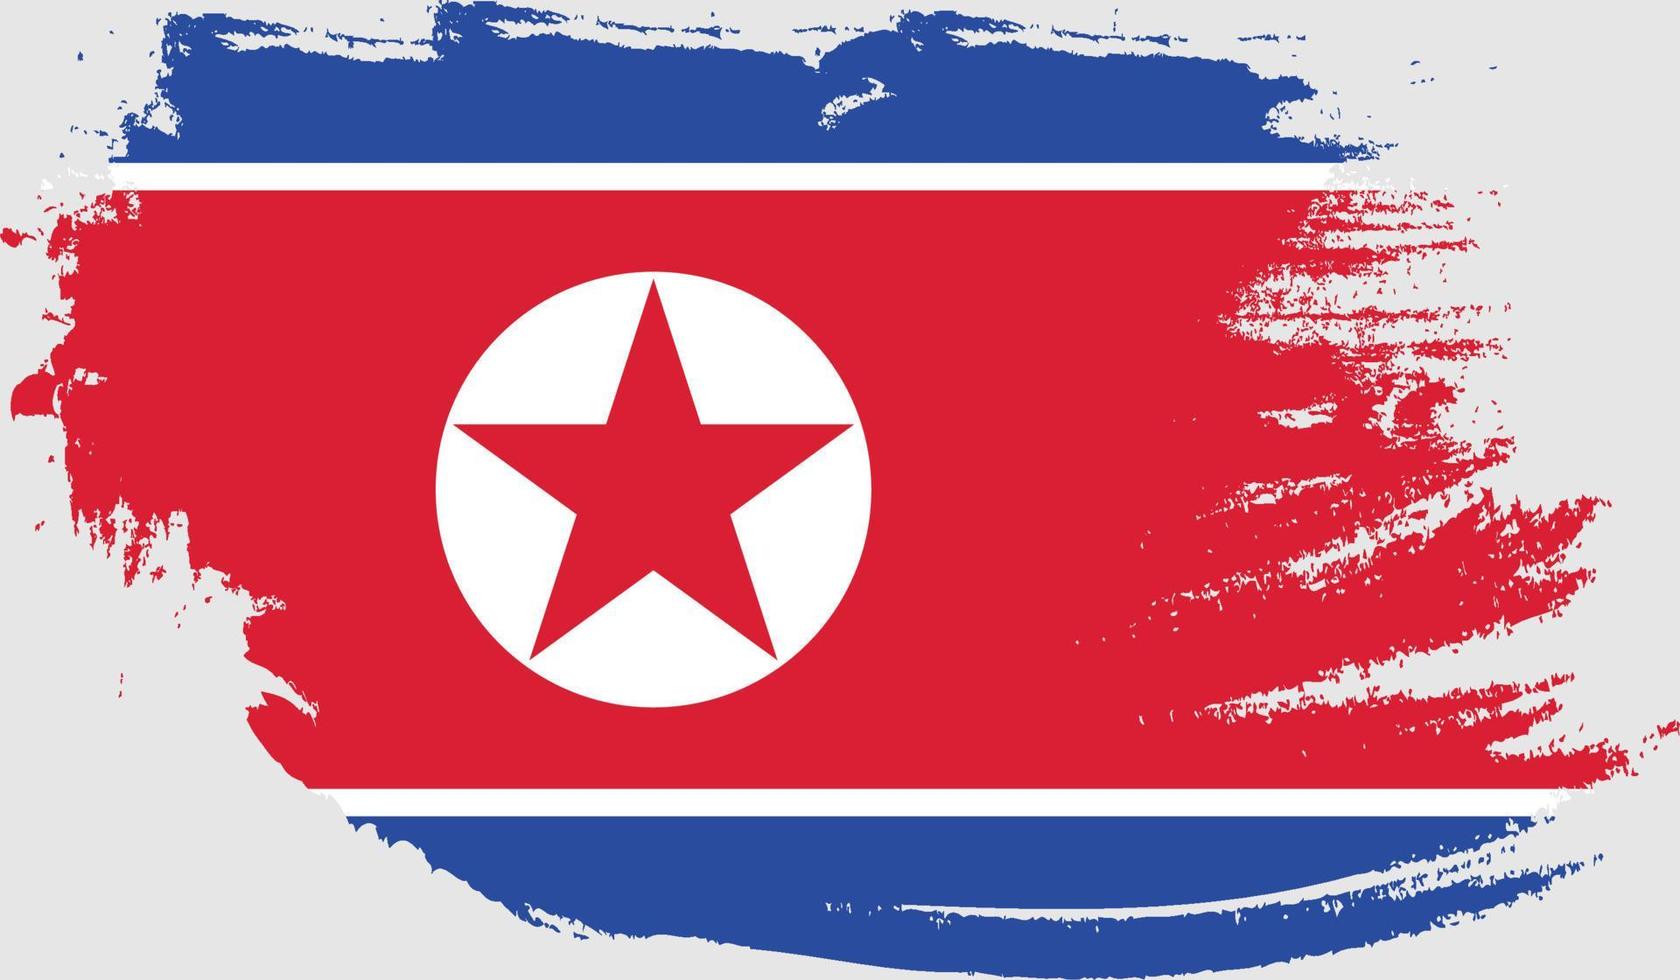 North Korea flag with grunge texture vector